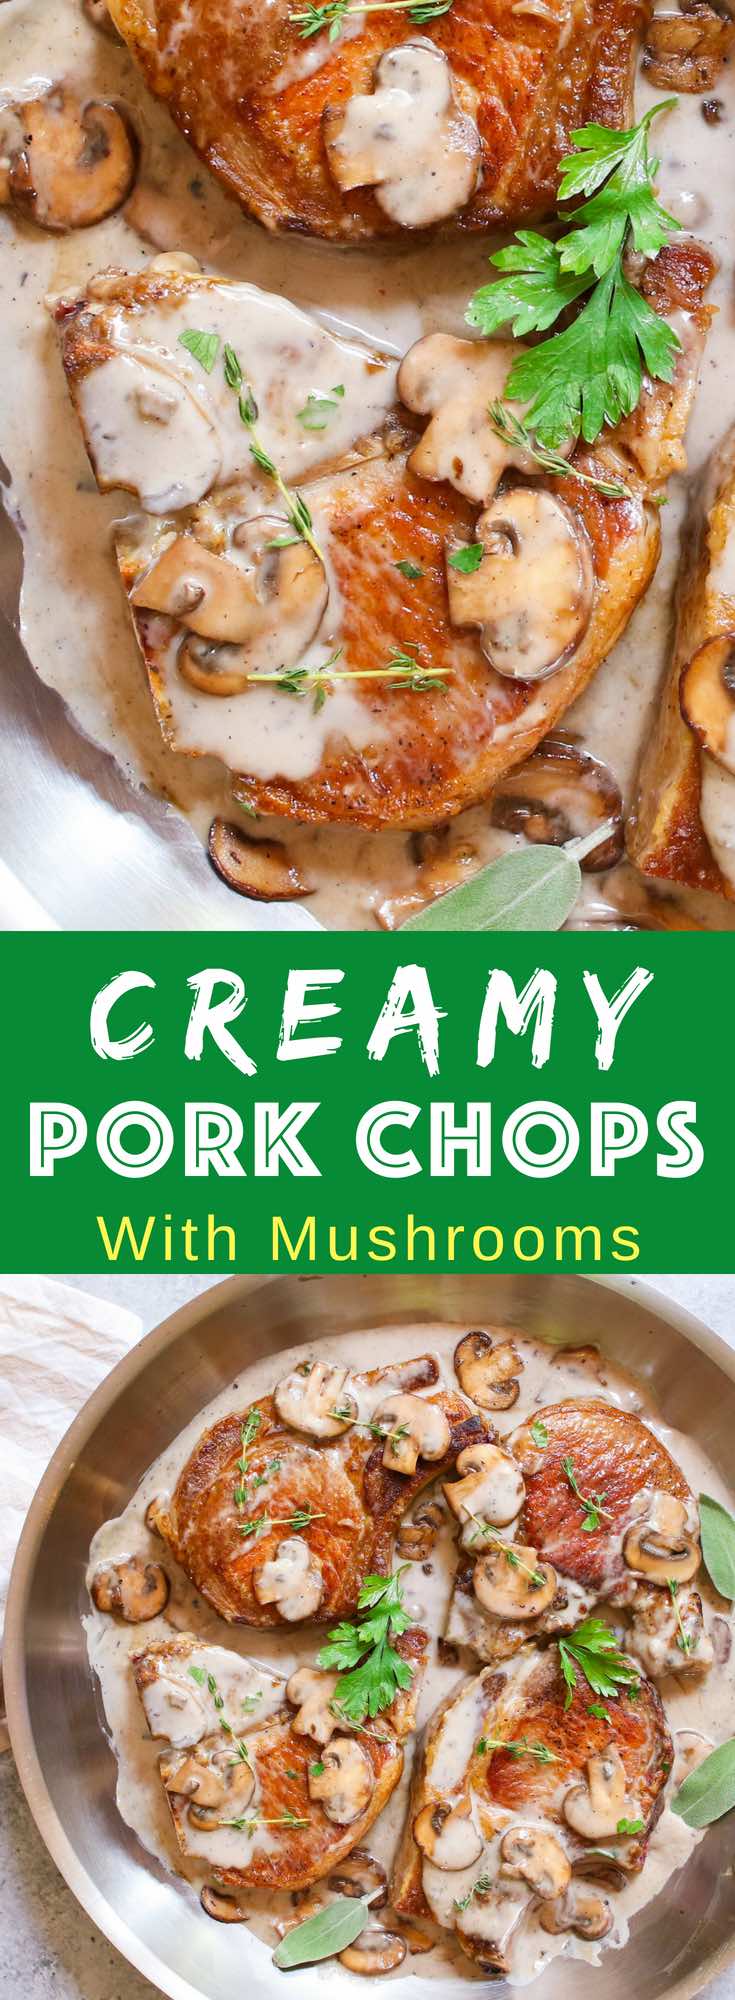 Cream of Mushroom Pork Chops with juicy and tender pork chops smothered in rich and creamy mushroom soup! This comforting Mushroom Pork Chops dish makes an easy dinner recipe for busy nights with one pan and 30 minutes! #CreamyPorkChops #MushroomPorkChops